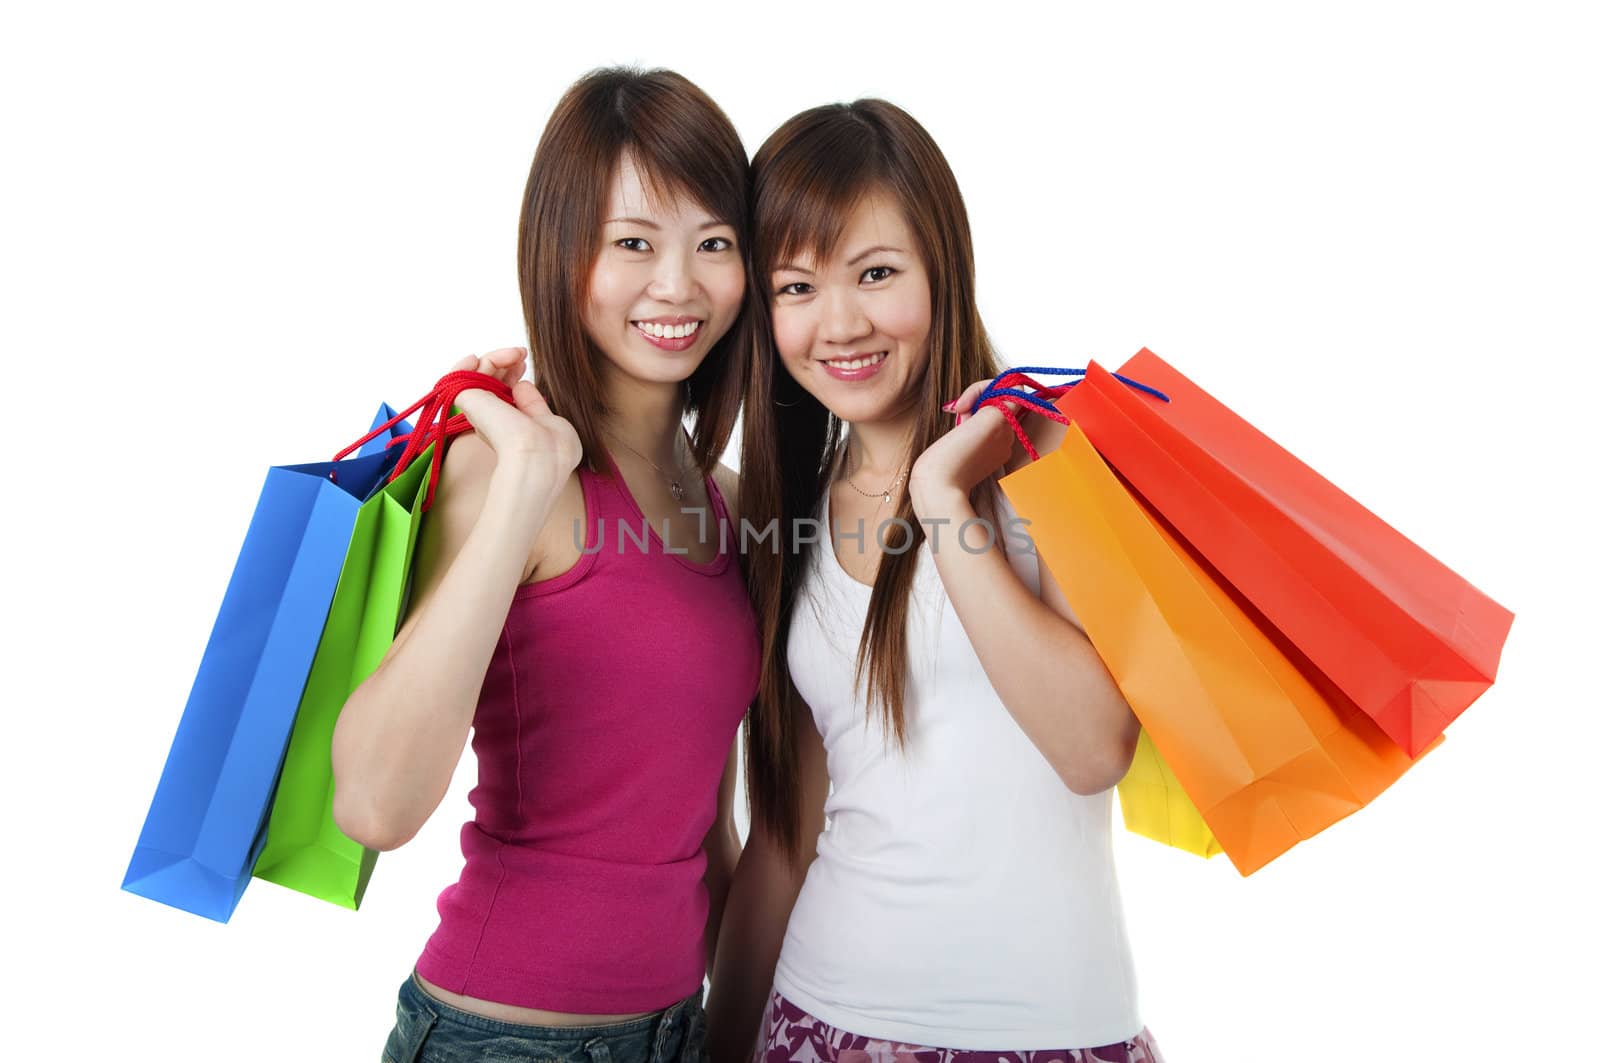 Happy Asian girls standing with shopping bags against white background.